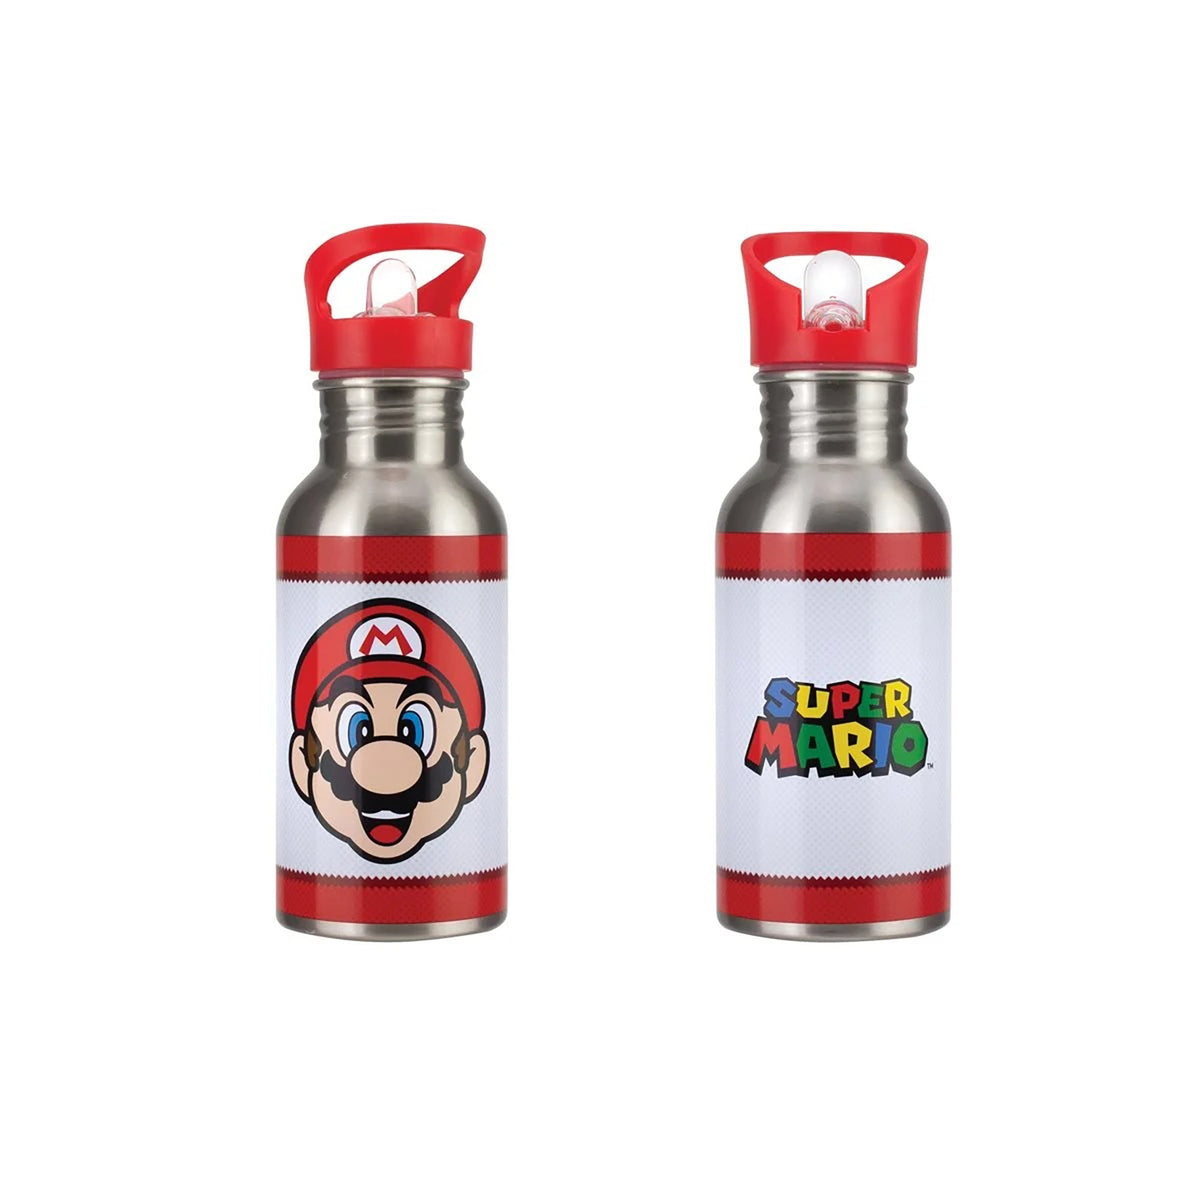 PALADONE PRODUCTS INC. Novelties Super Mario Metal Water Bottle With Straw, 16 Oz, 1 Count 5055964767570